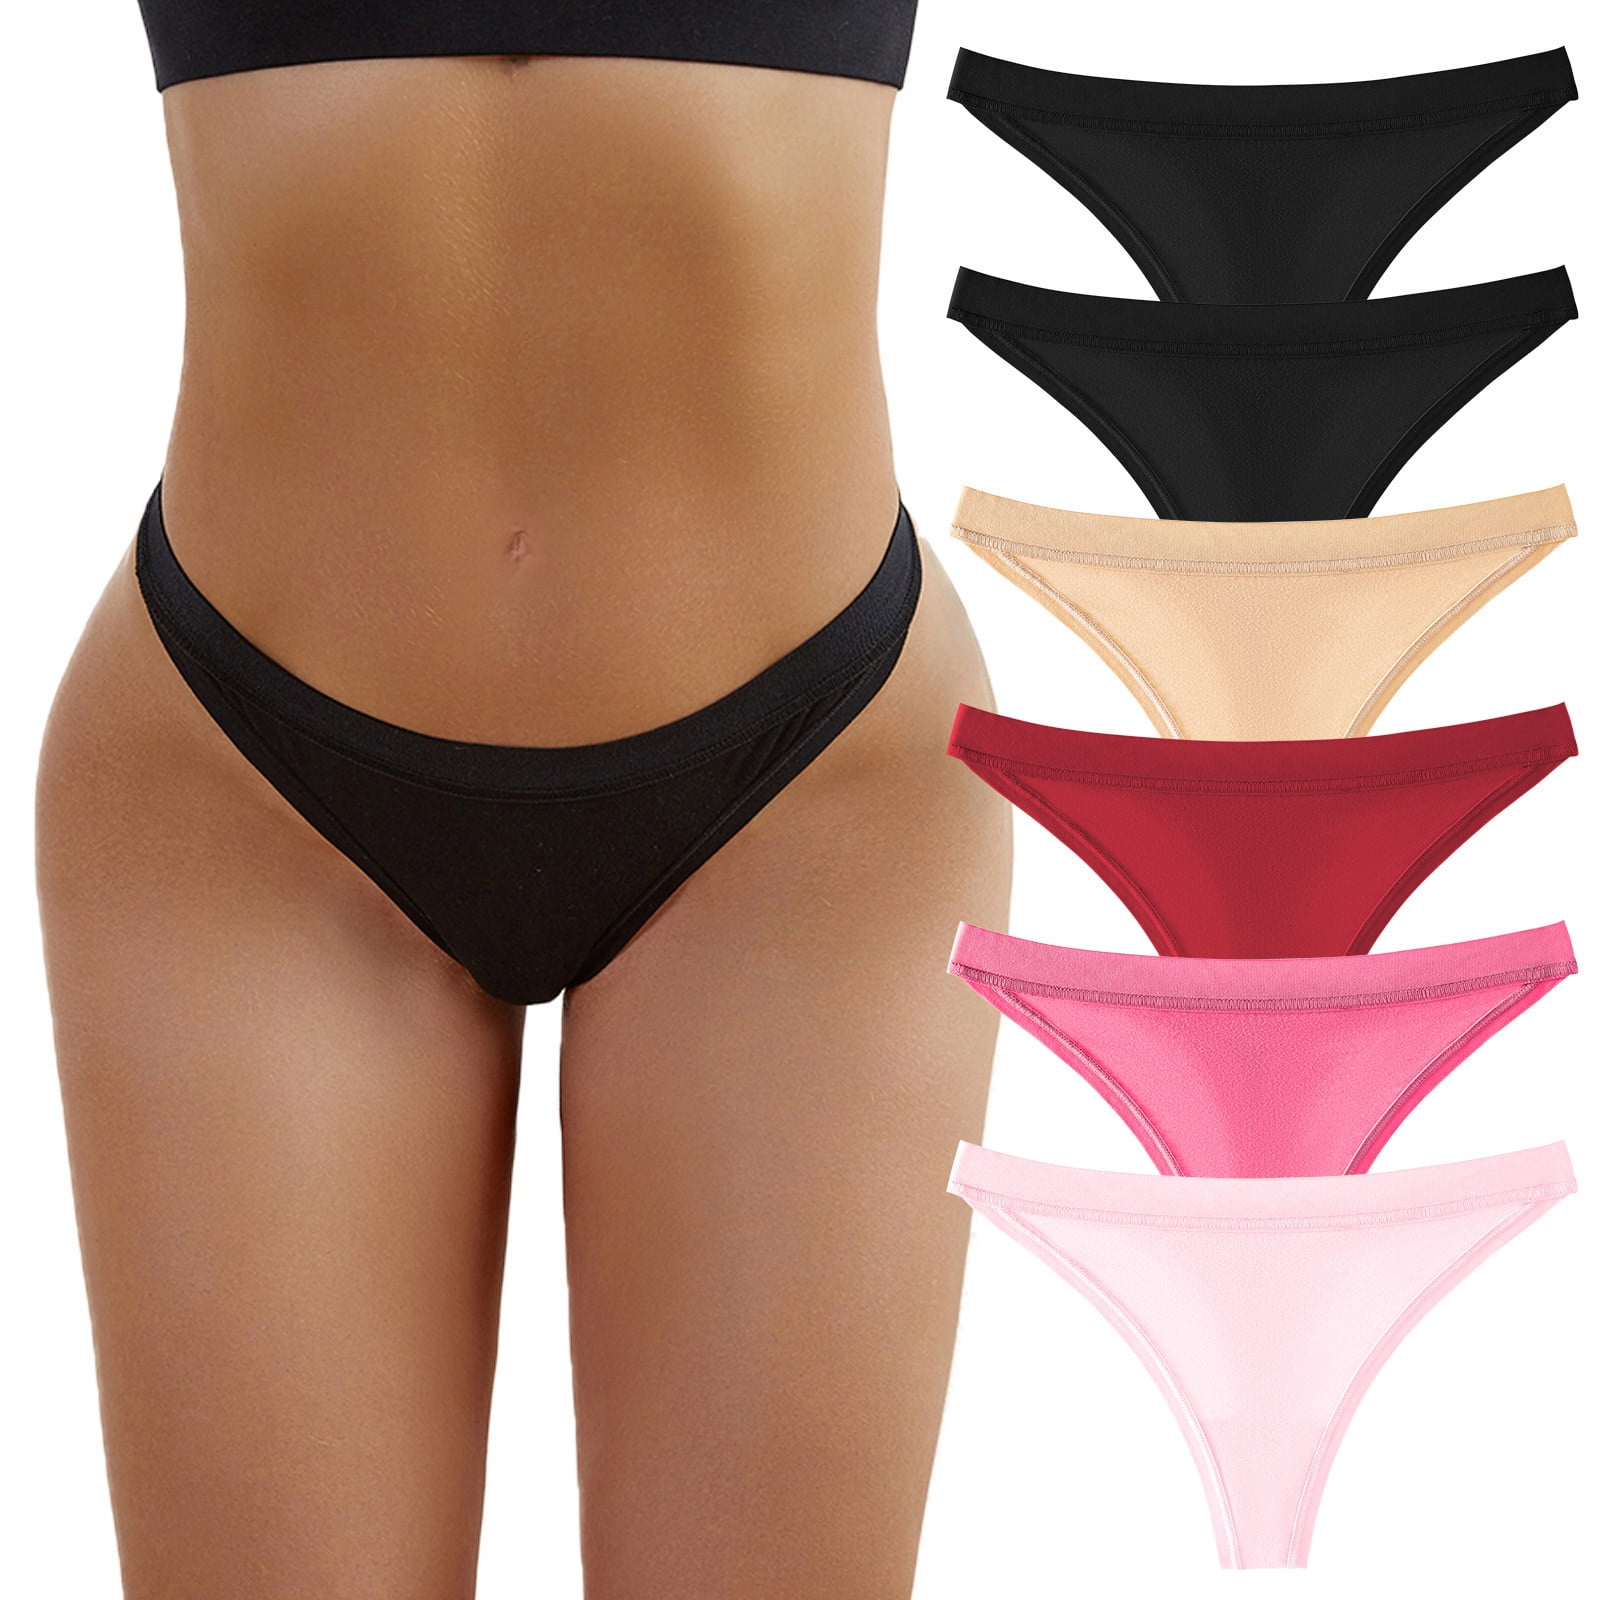 adviicd Nylon Panties for Women Women's Underwear, High Waist Cotton  Breathable Full Coverage Panties Brief Regular and Plus Size BK1 Small 